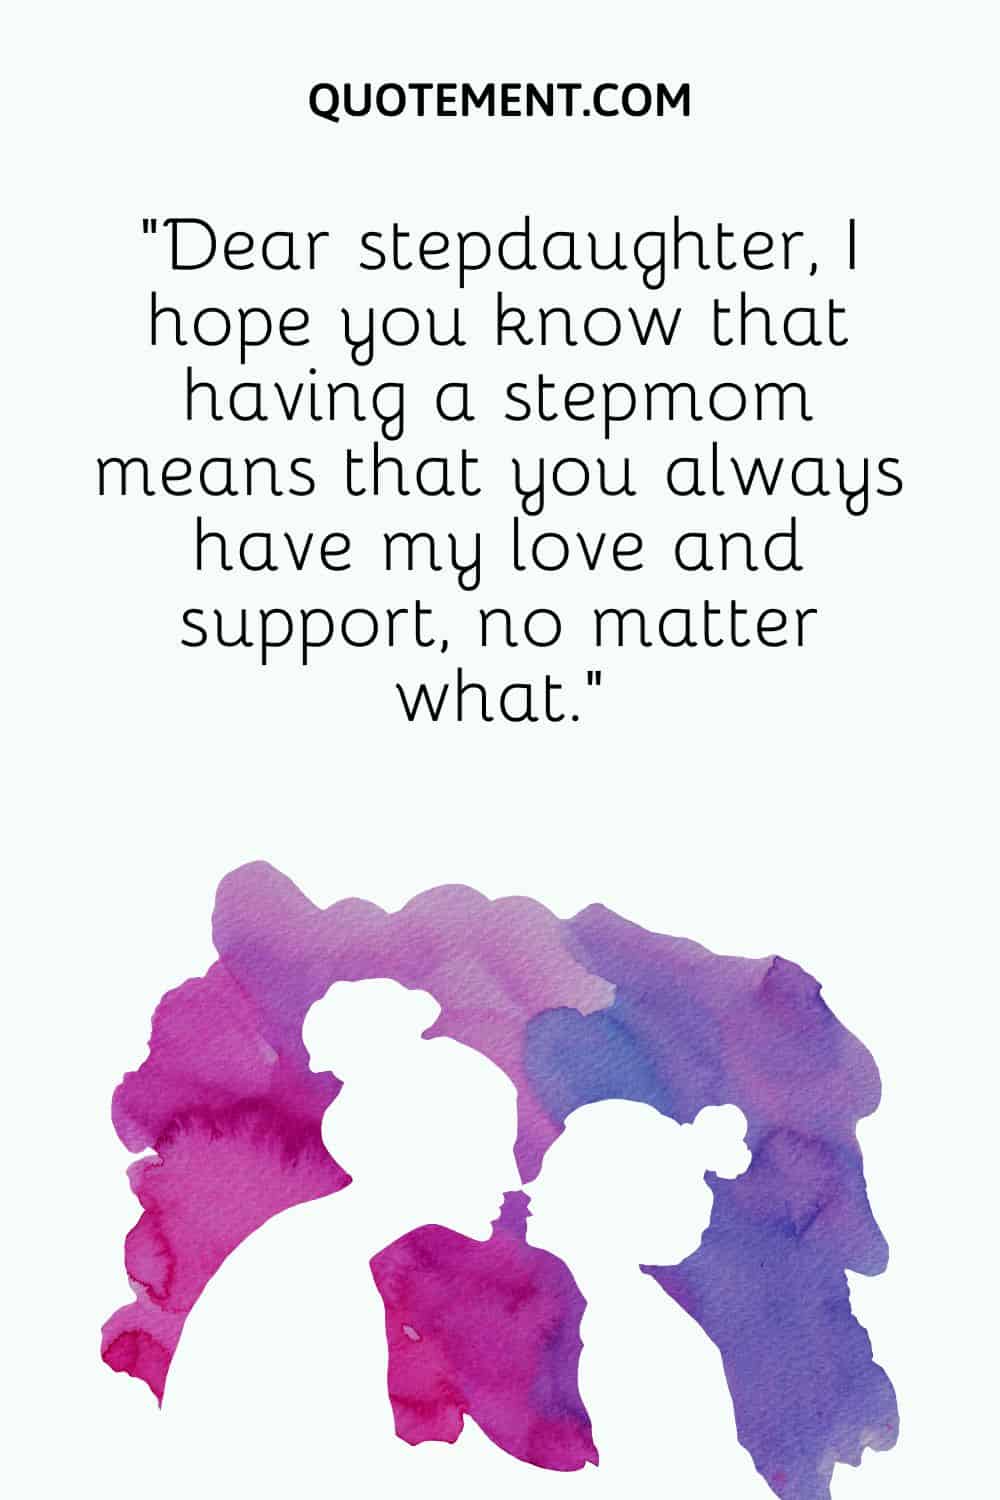 Dear stepdaughter, I hope you know that having a stepmom means that you always have my love and support